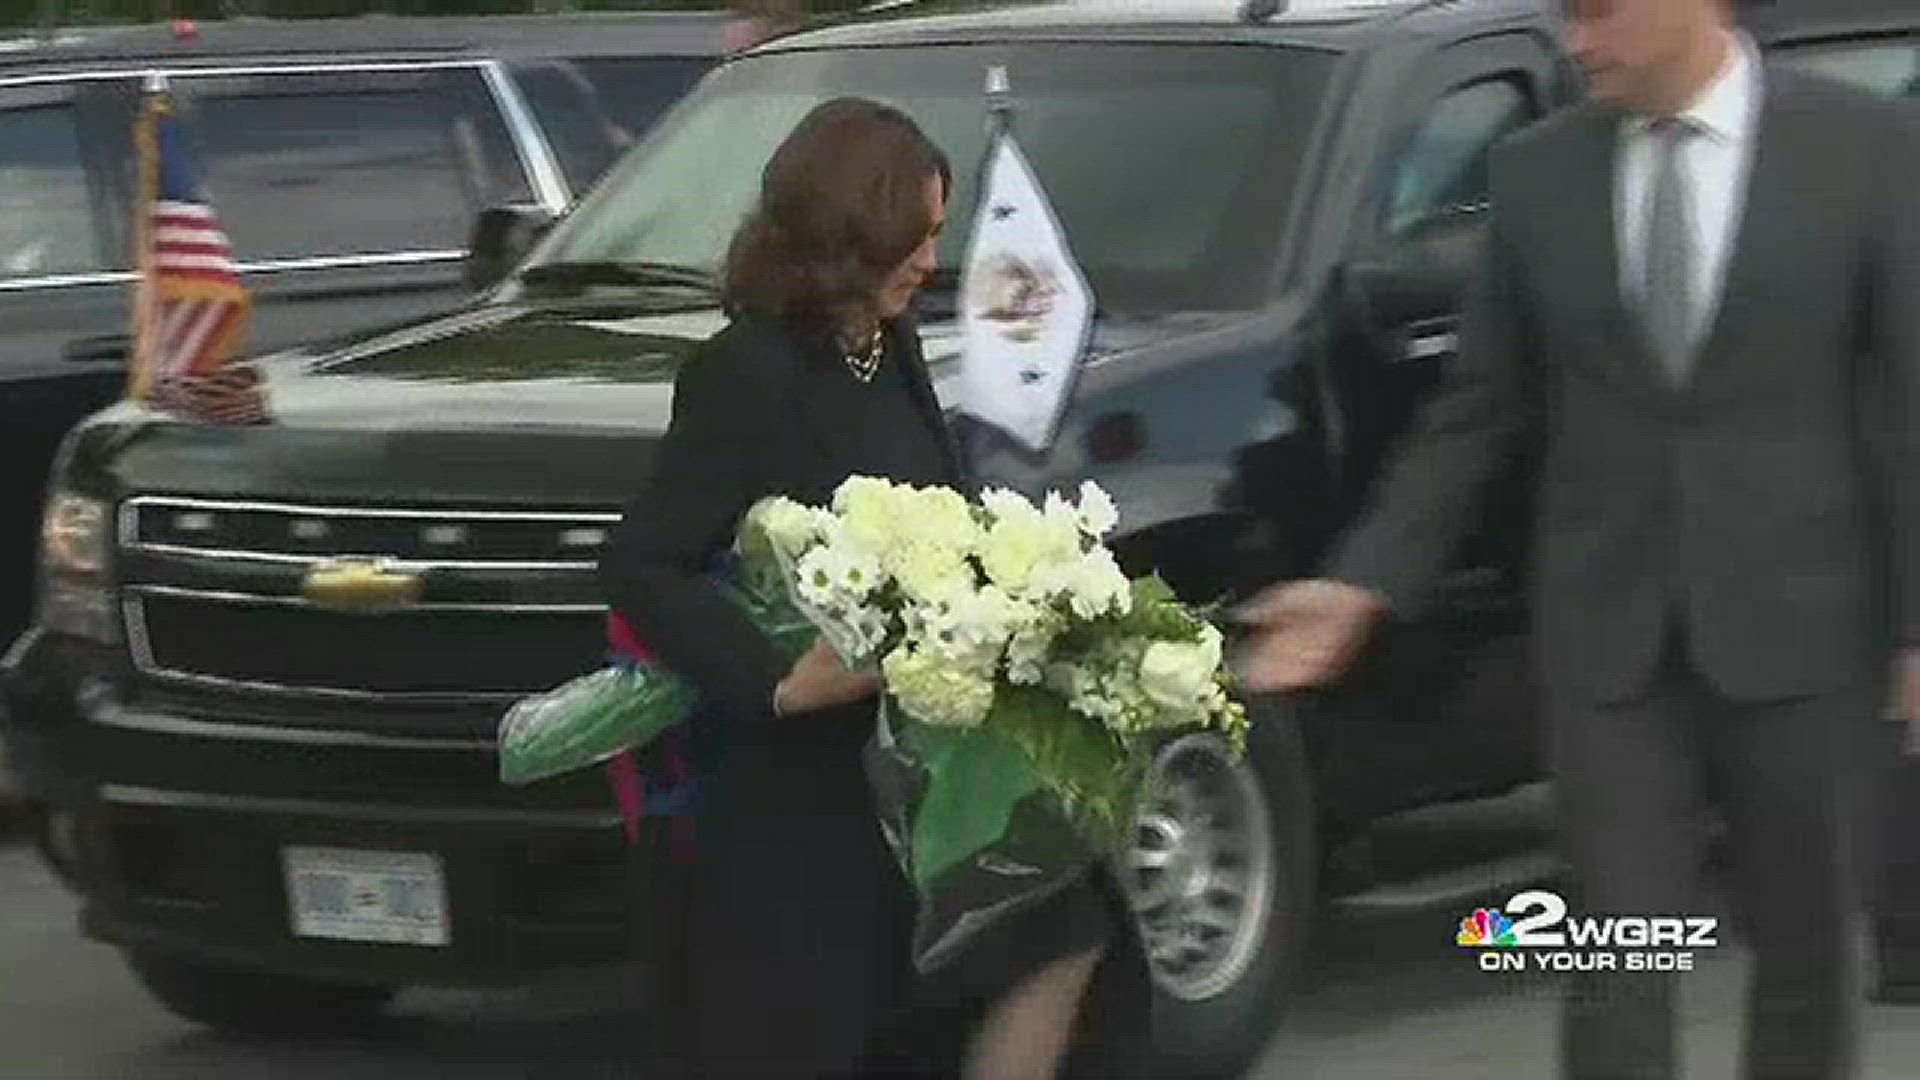 Vice President Kamala Harris brought flowers to the memorials at the Jefferson Avenue Tops during her visit to Buffalo on Saturday, May 28.